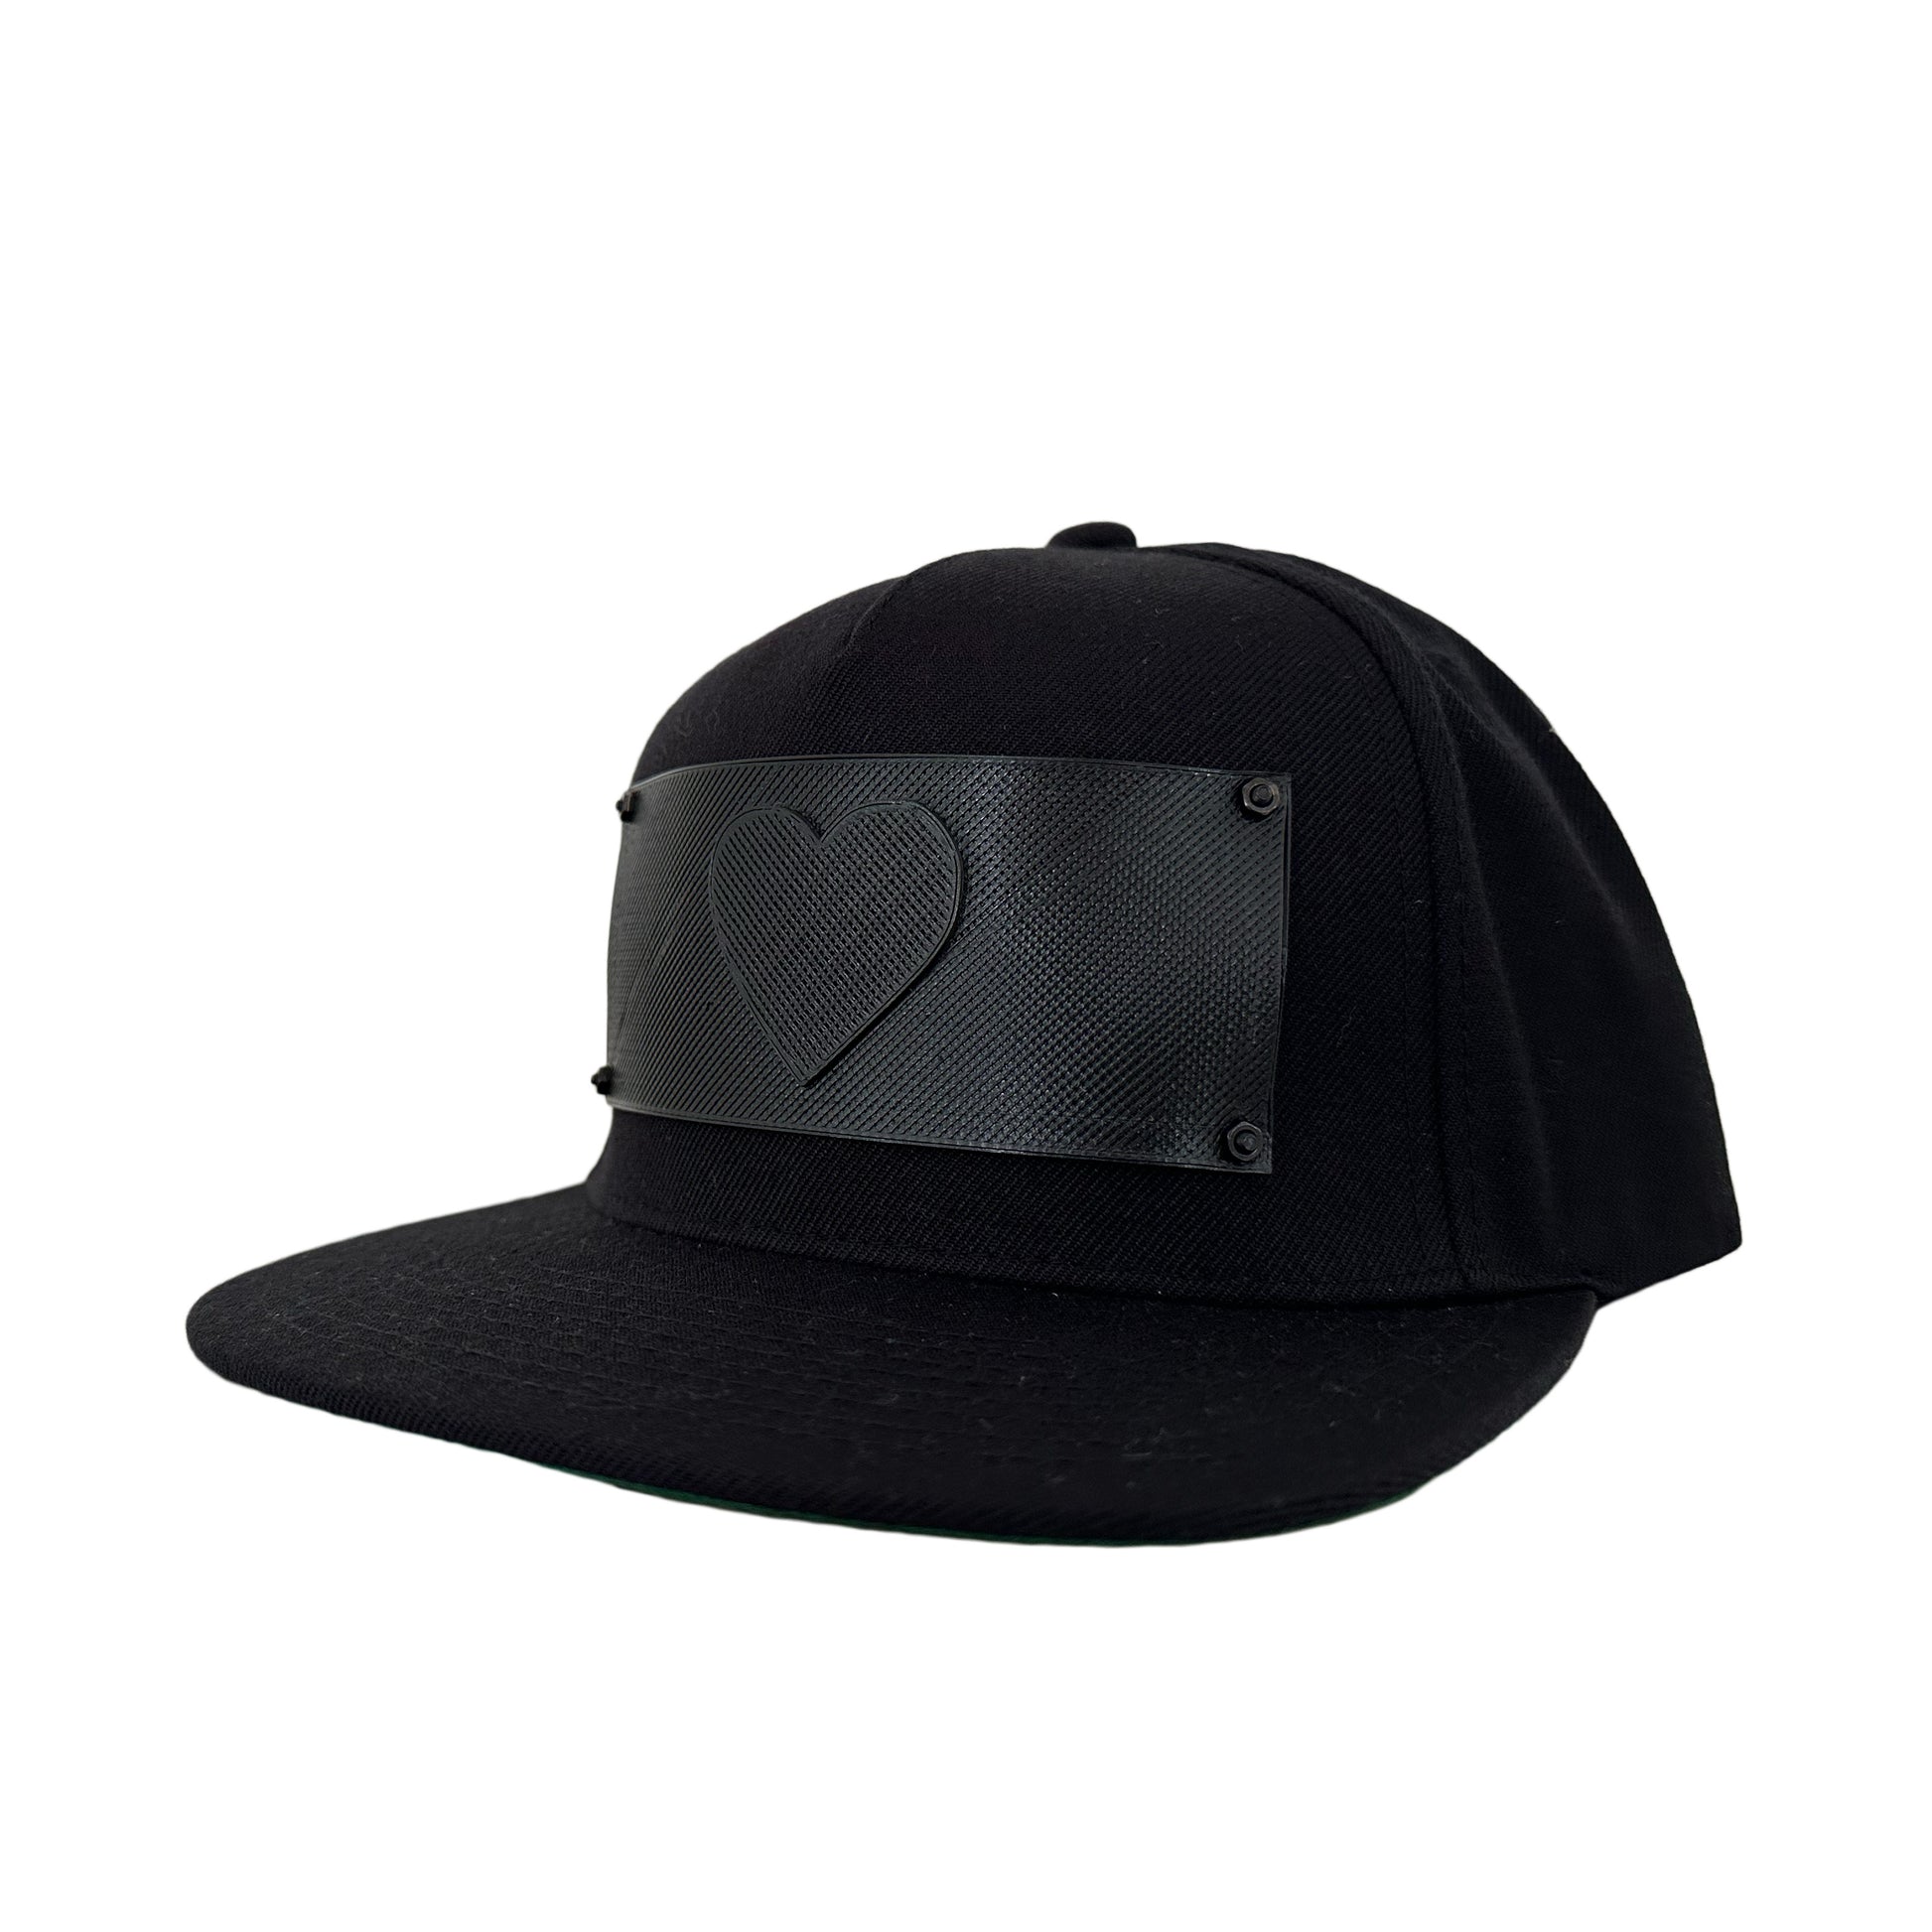 A black snapback baseball hat with a rectangular 3D printed black logo panel with a heart symbol on it.